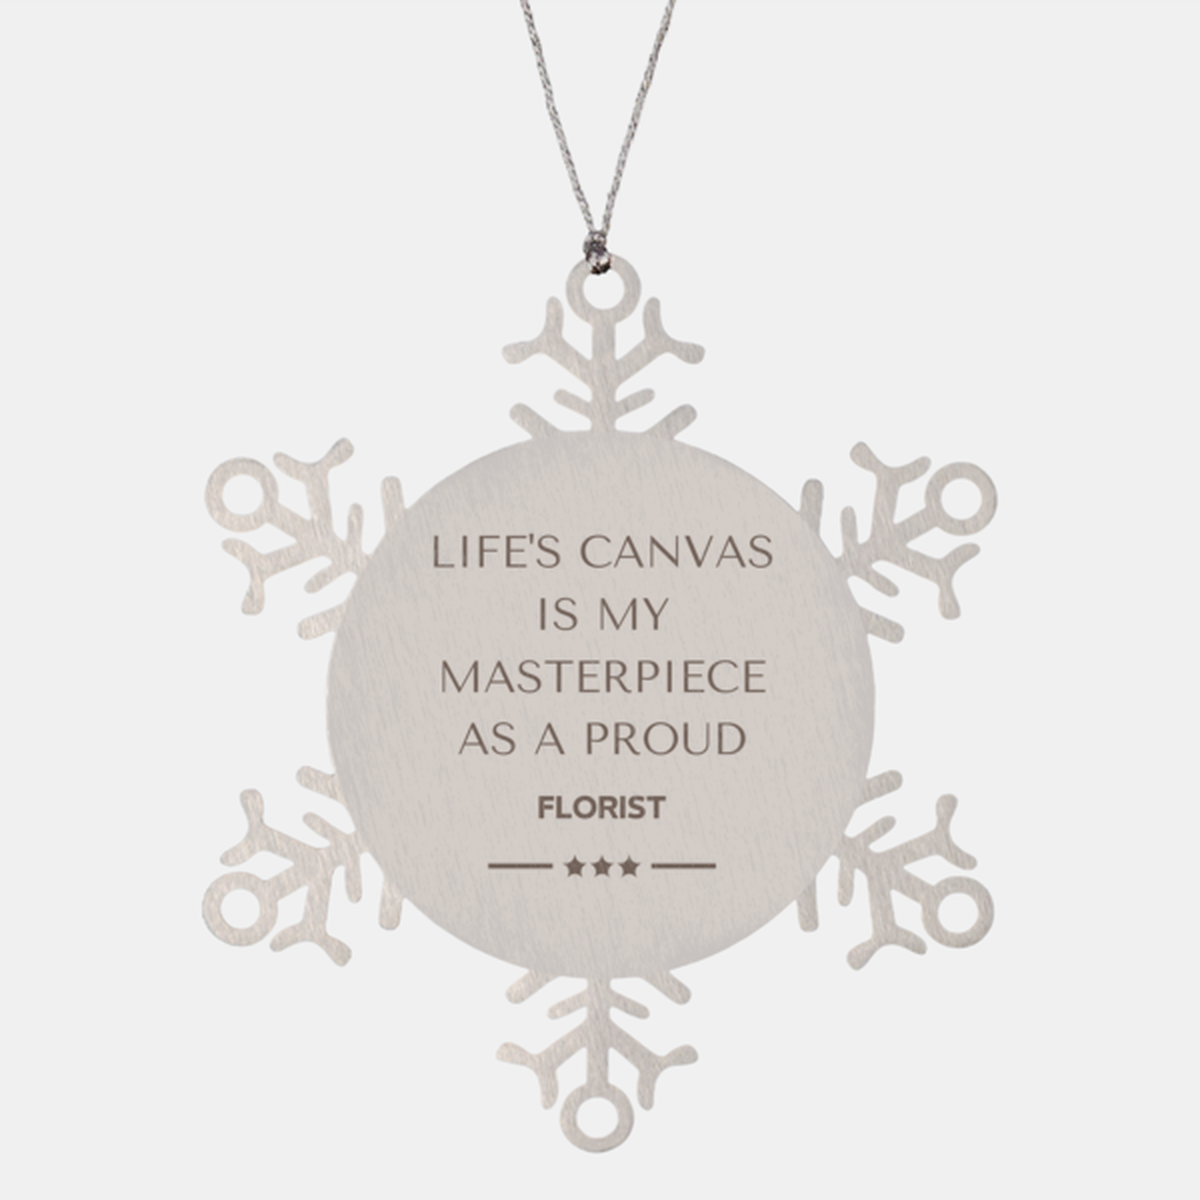 Proud Florist Gifts, Life's canvas is my masterpiece, Epic Birthday Christmas Unique Snowflake Ornament For Florist, Coworkers, Men, Women, Friends